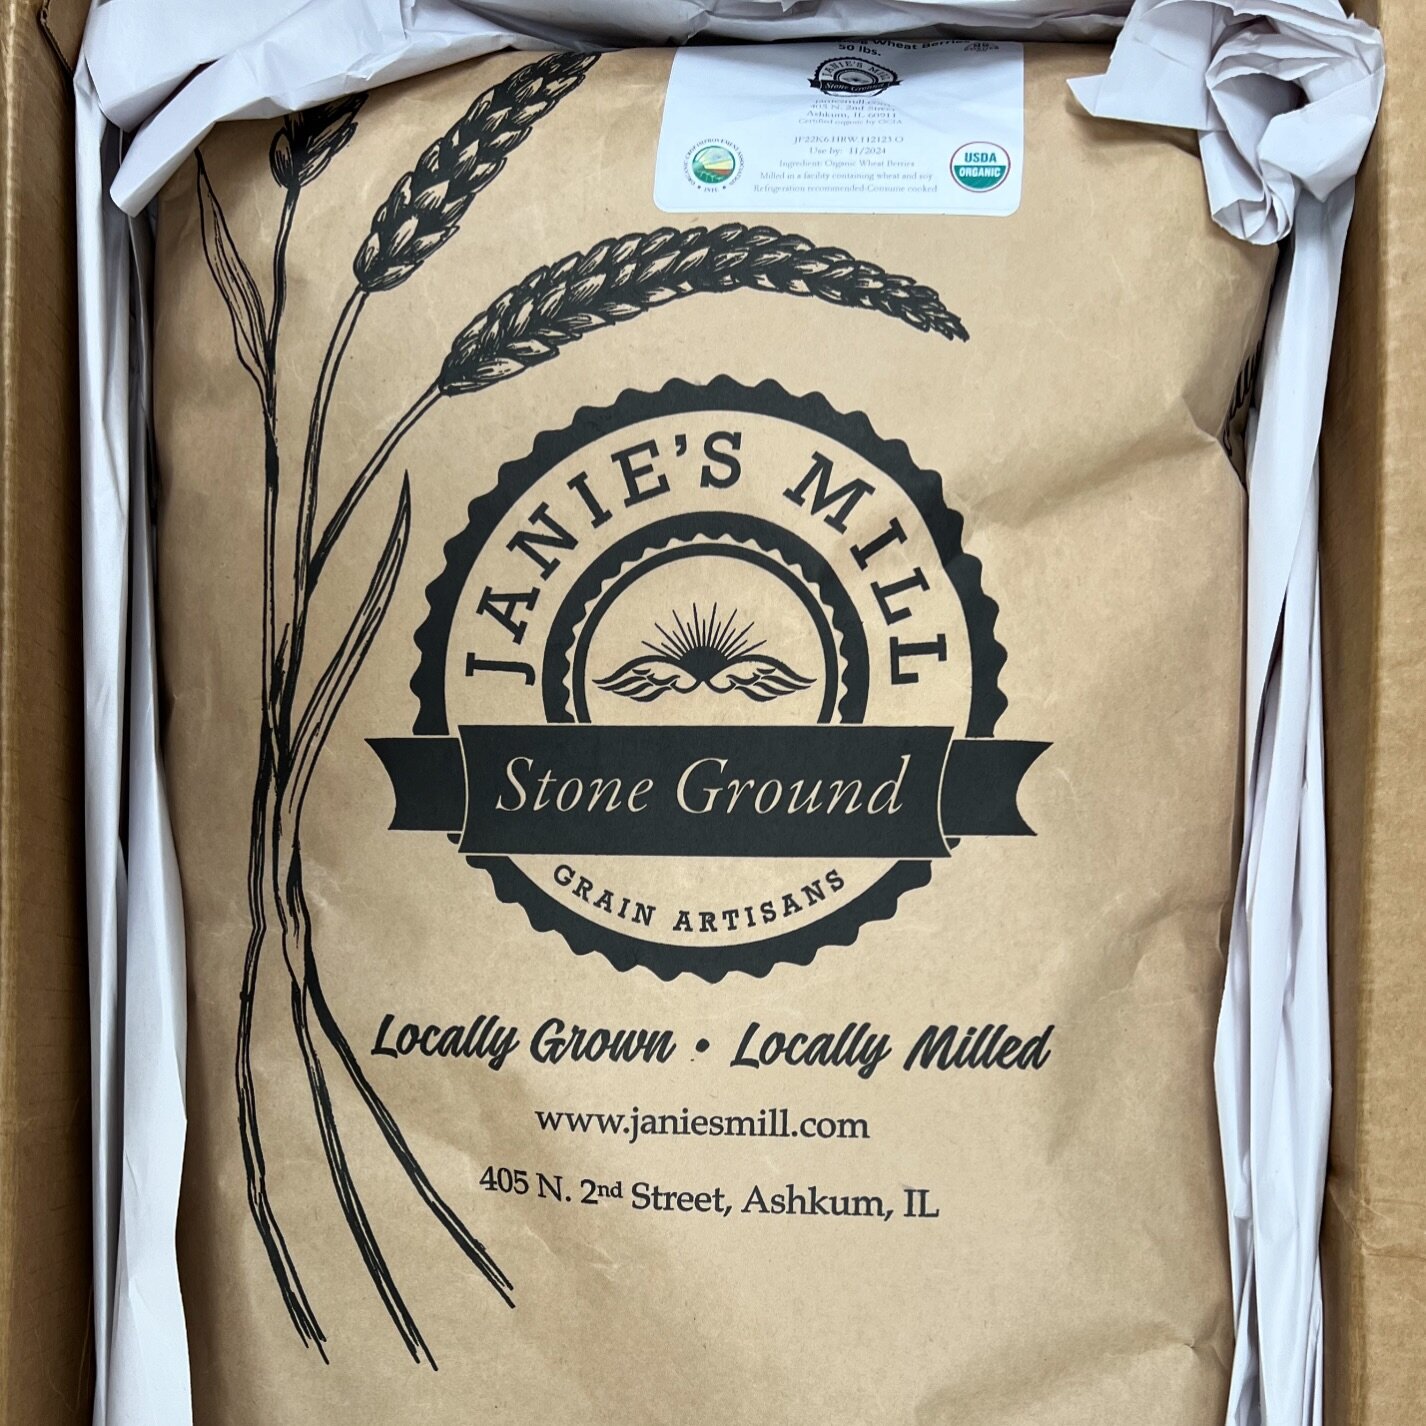 Opening another case of organic grain from @janiesmill 😌
This sweet, nutty wheat gets milled in our shop and baked into the sourdough breads you love.